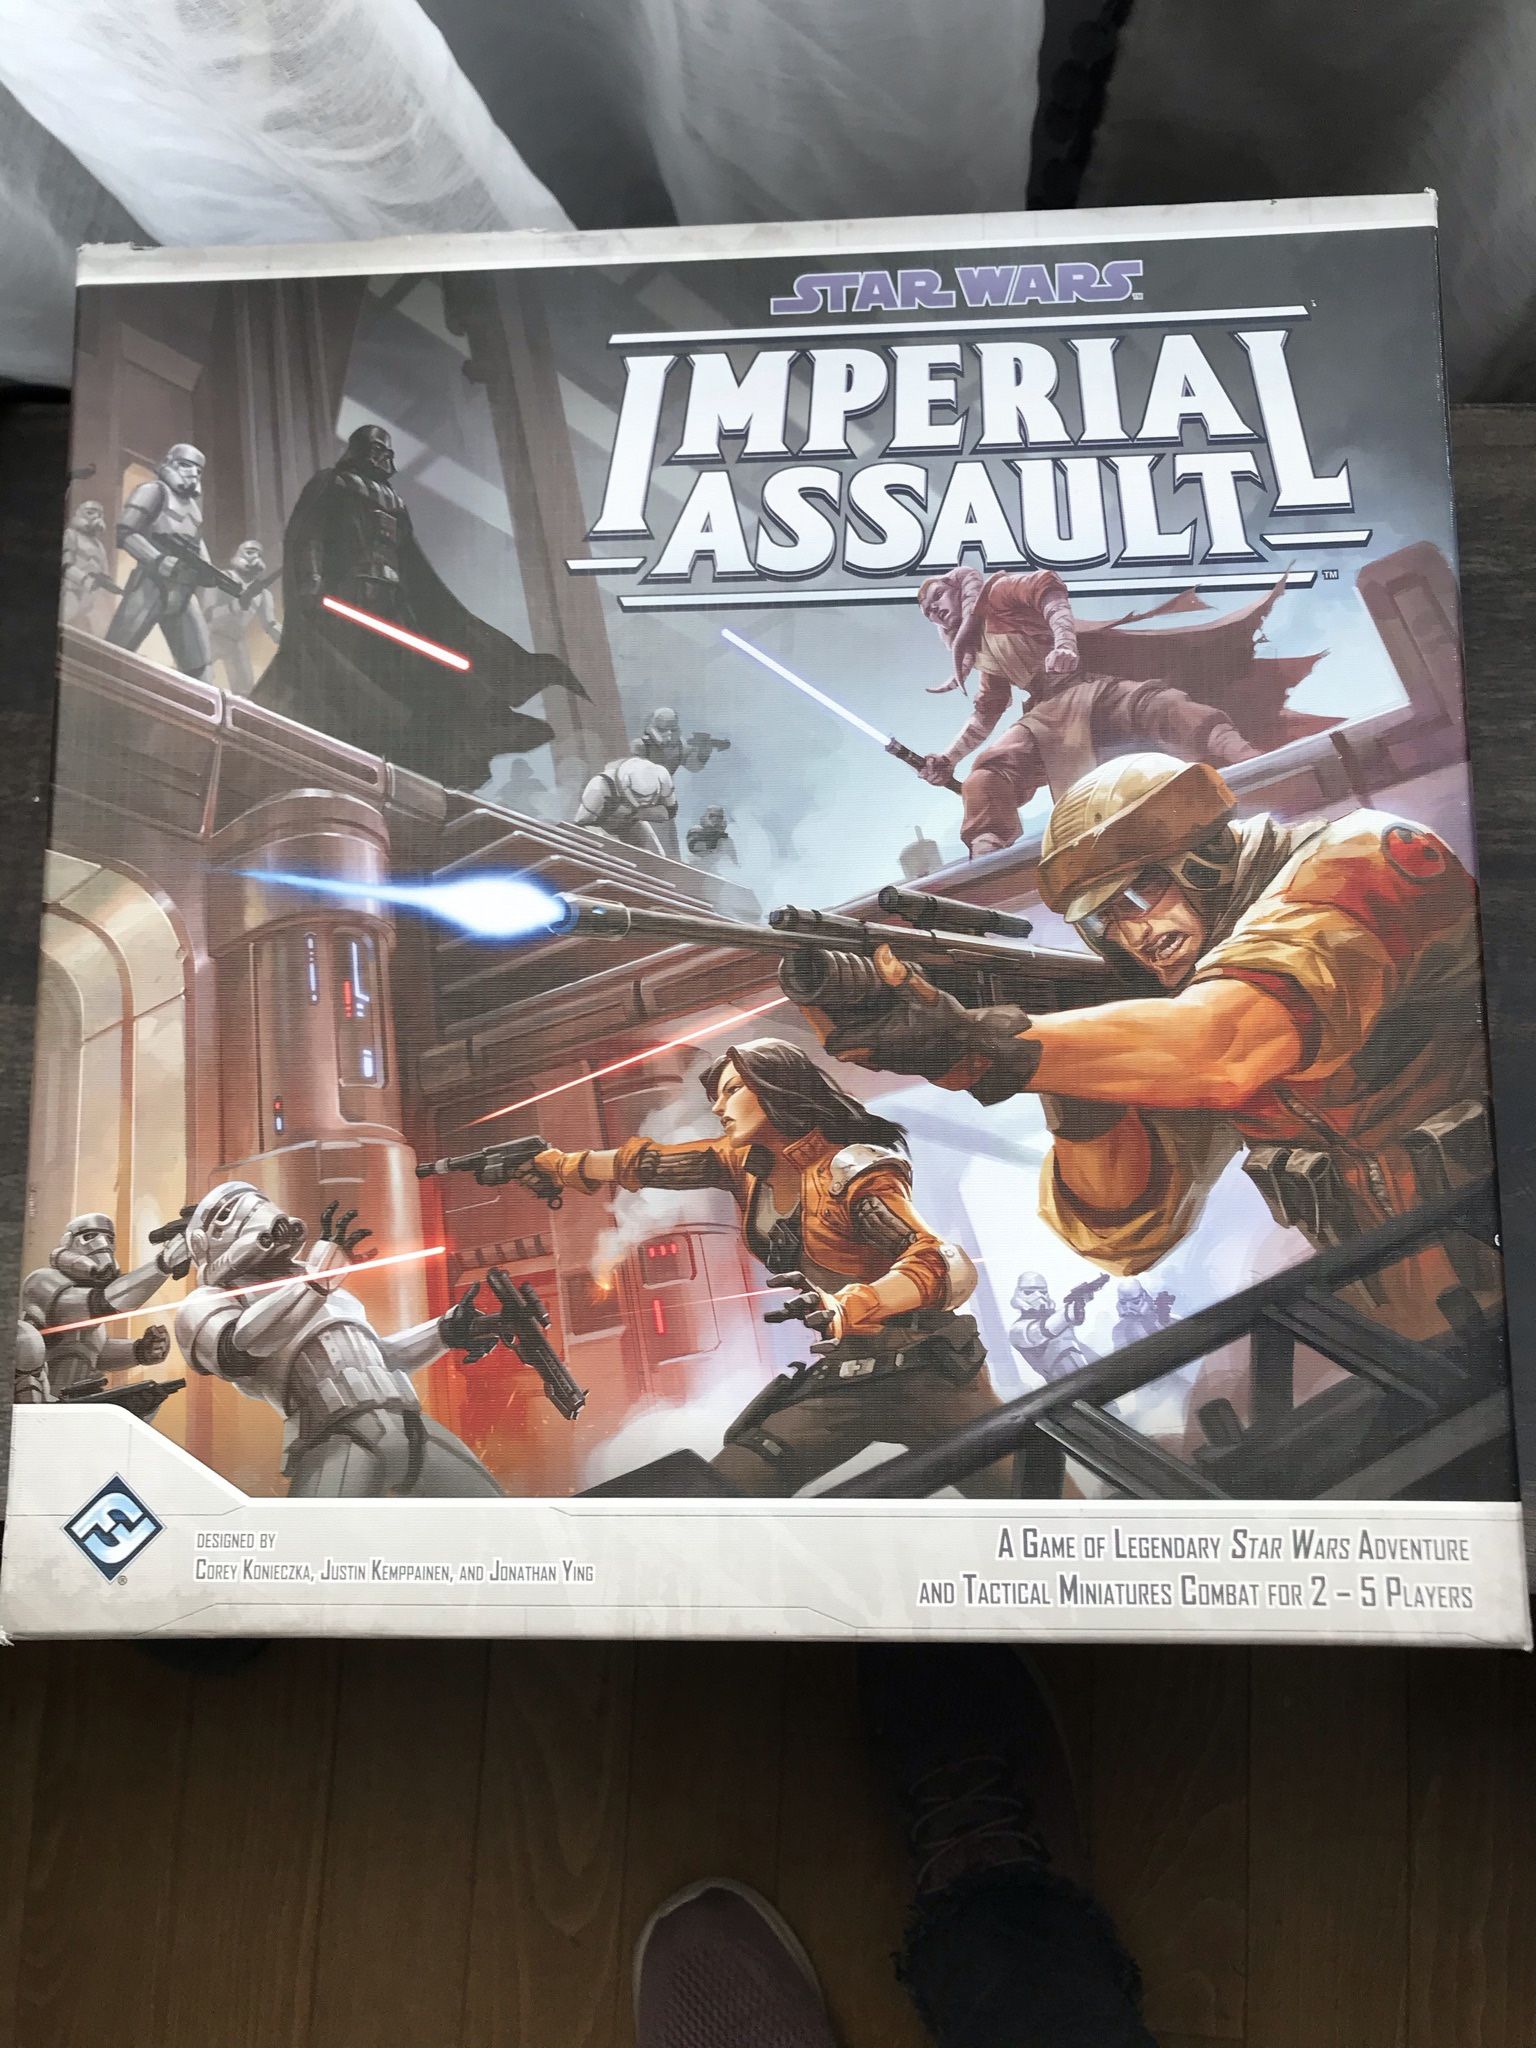 Imperial Assault Game 